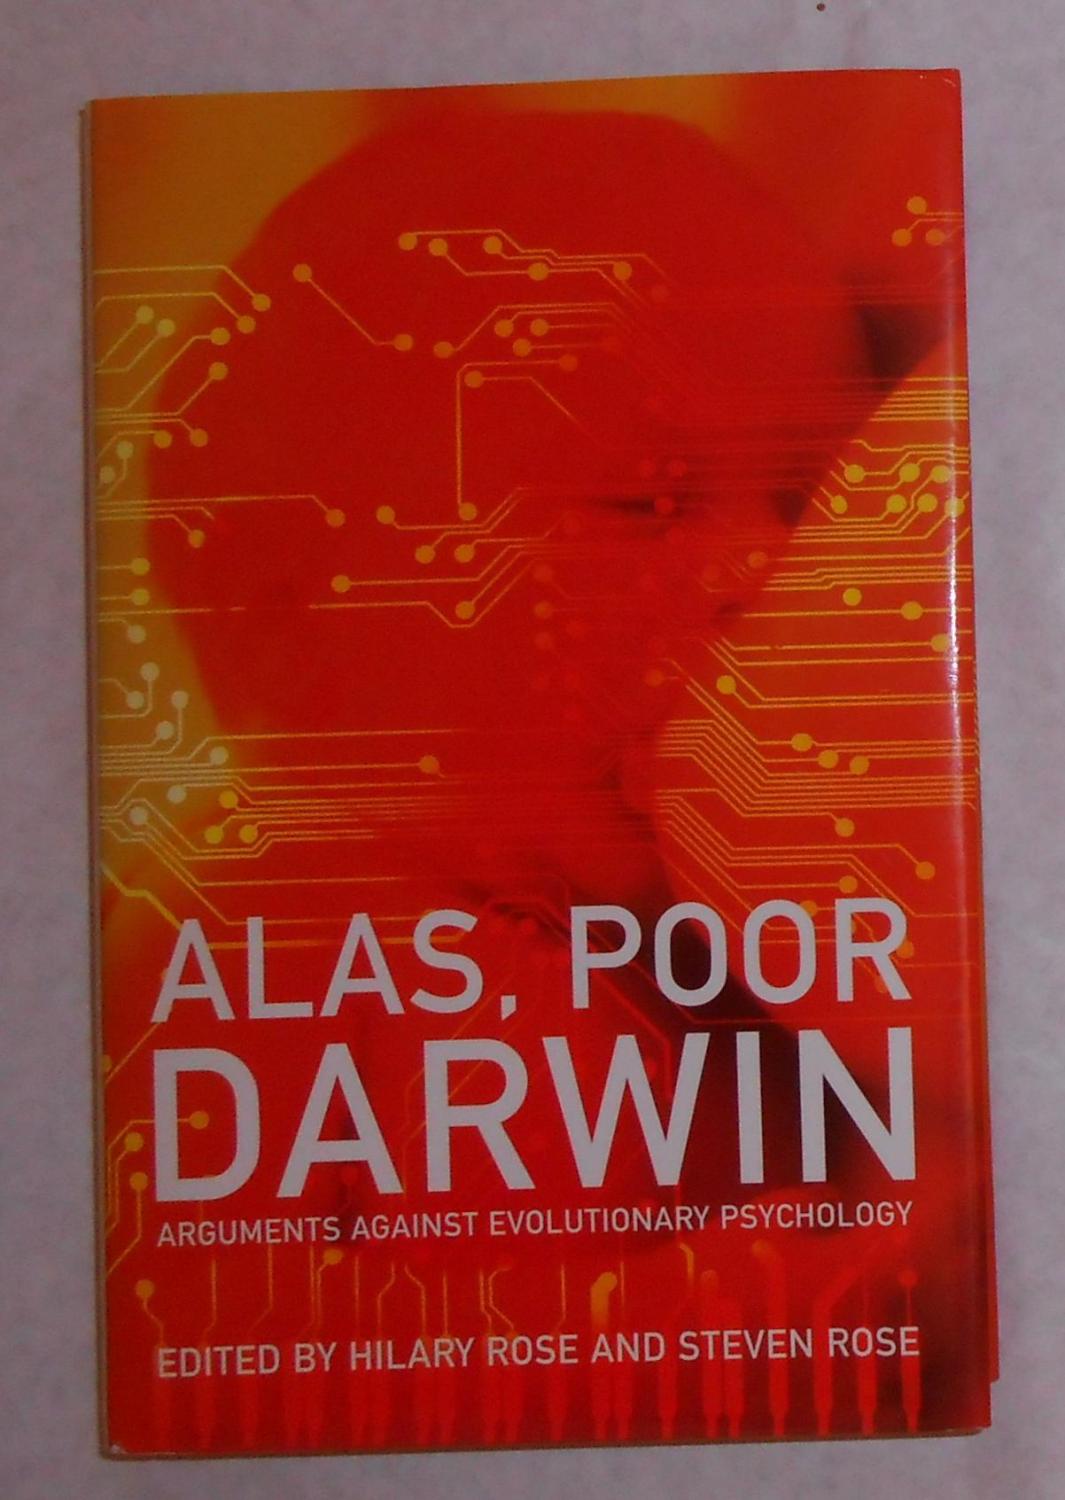 Hilary　Psychology　1st　Signed　(SIGNED　COPY)　Author(s)　by　Steven　ROSE,　and　Rose:　(2000)　HARDCOVER　Evolutionary　by　David　Bunnett　Books　Alas　Darwin　Against　Poor　Arguments　Edition.,